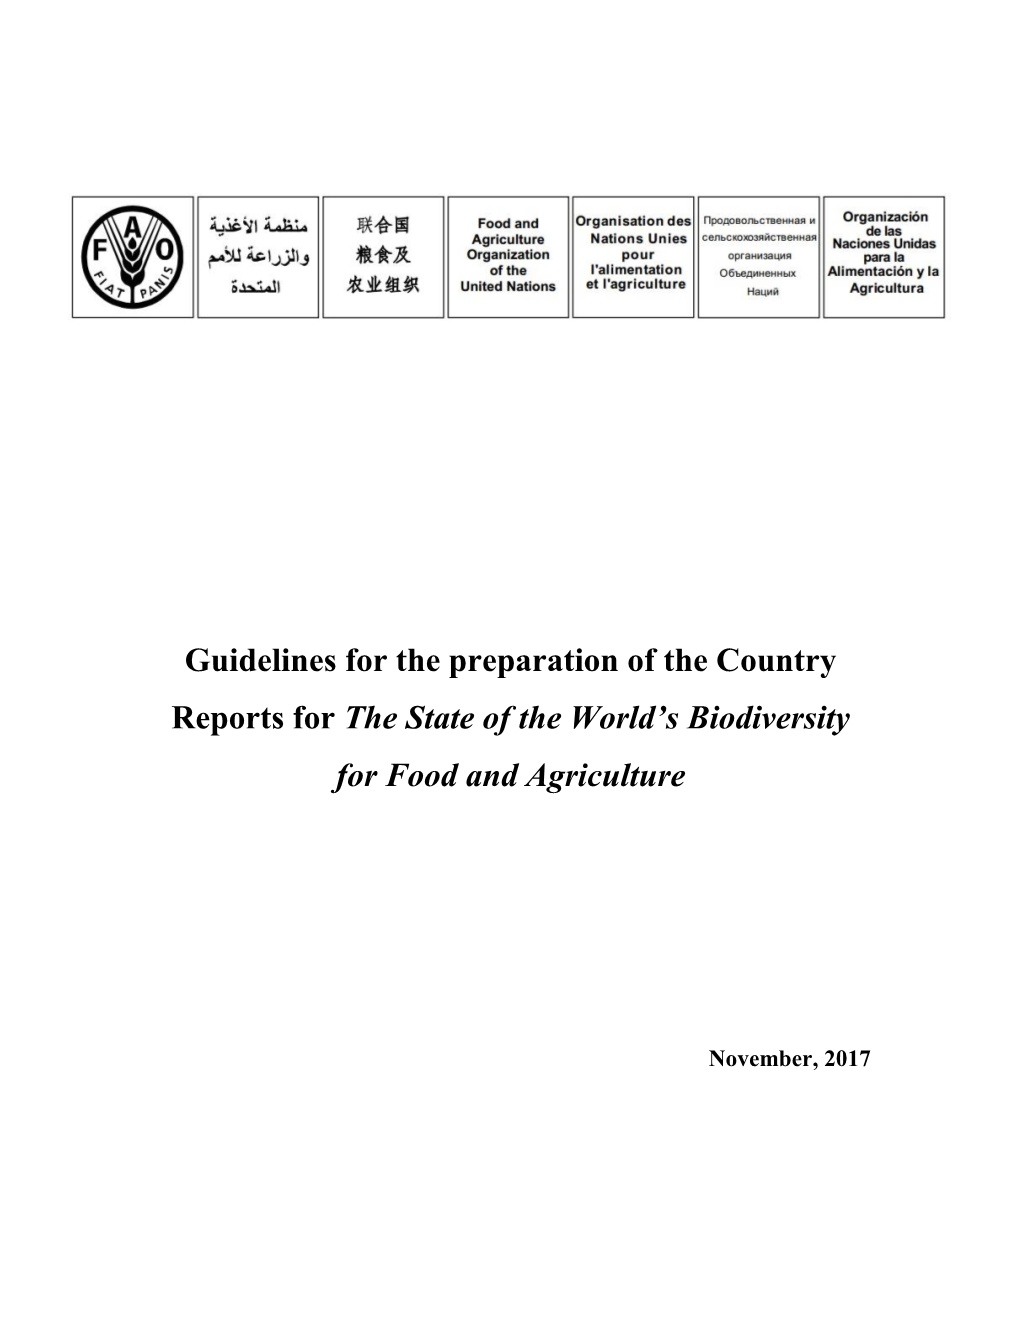 Guidelines for the Preparation of the Country Reports for the State of the World’S Biodiversity for Food and Agriculture